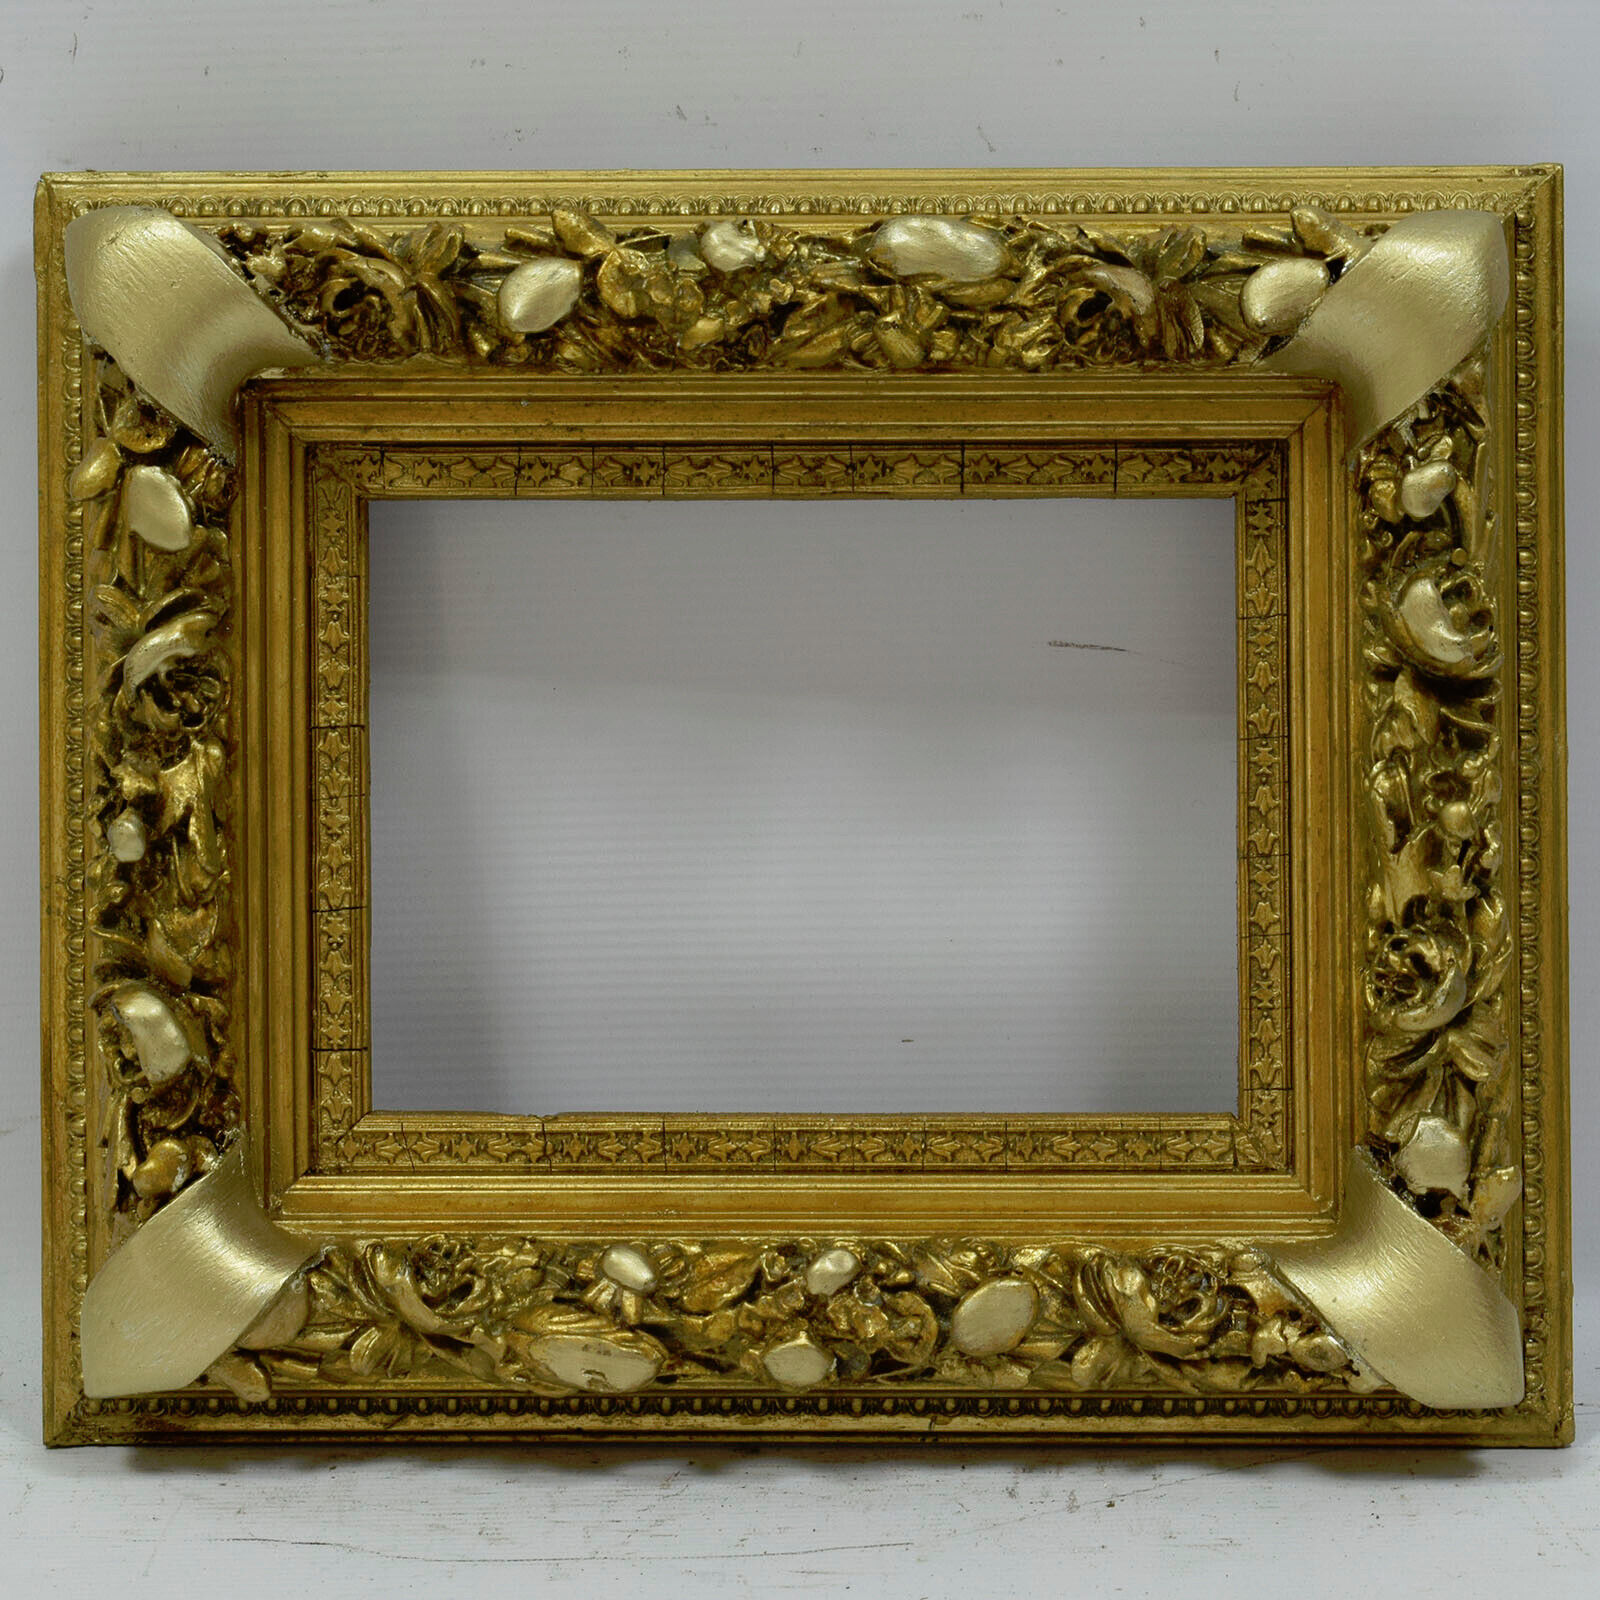 Ca. 1900 Old wooden frame in original condition Internal: 8.3x5.9 in